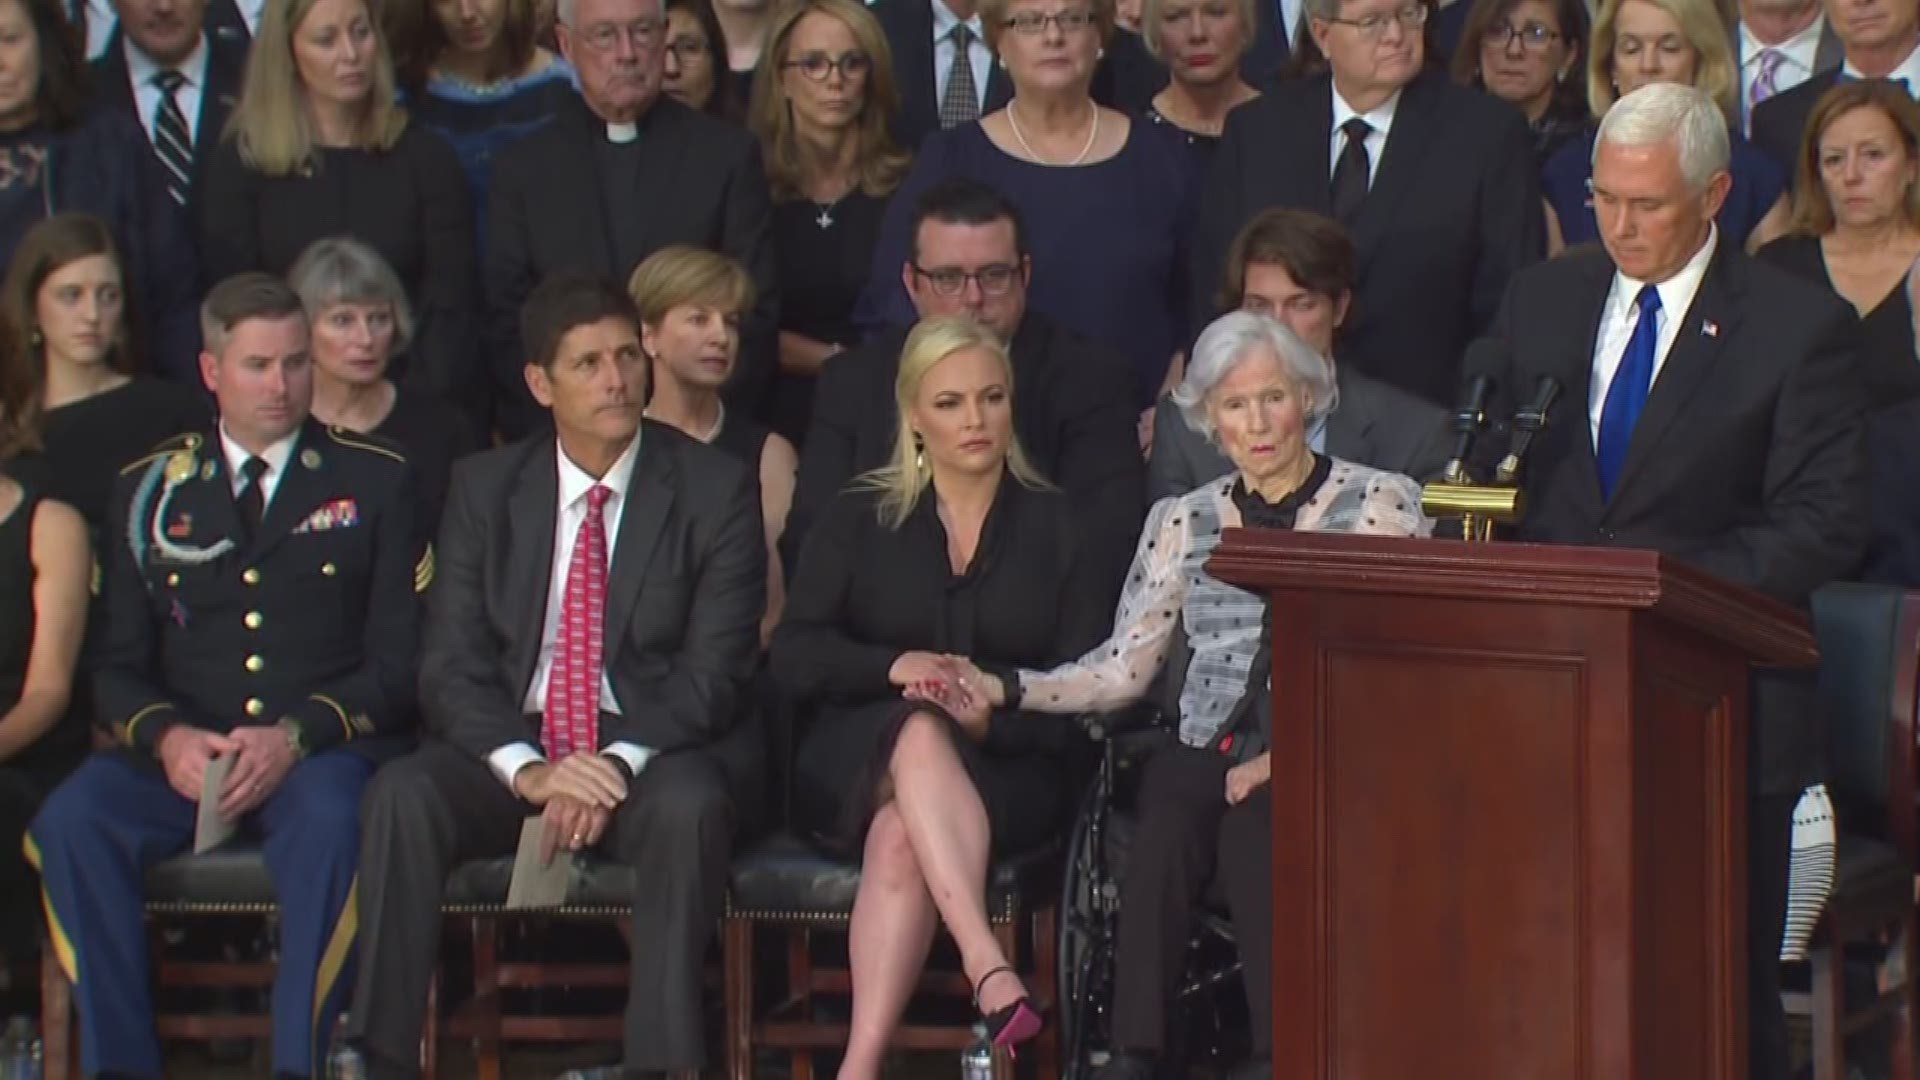 Mike Pence, Vice President of the United States, speaks at John McCain's memorial service while he lies in state tat the U.S. Capitol Rotunda